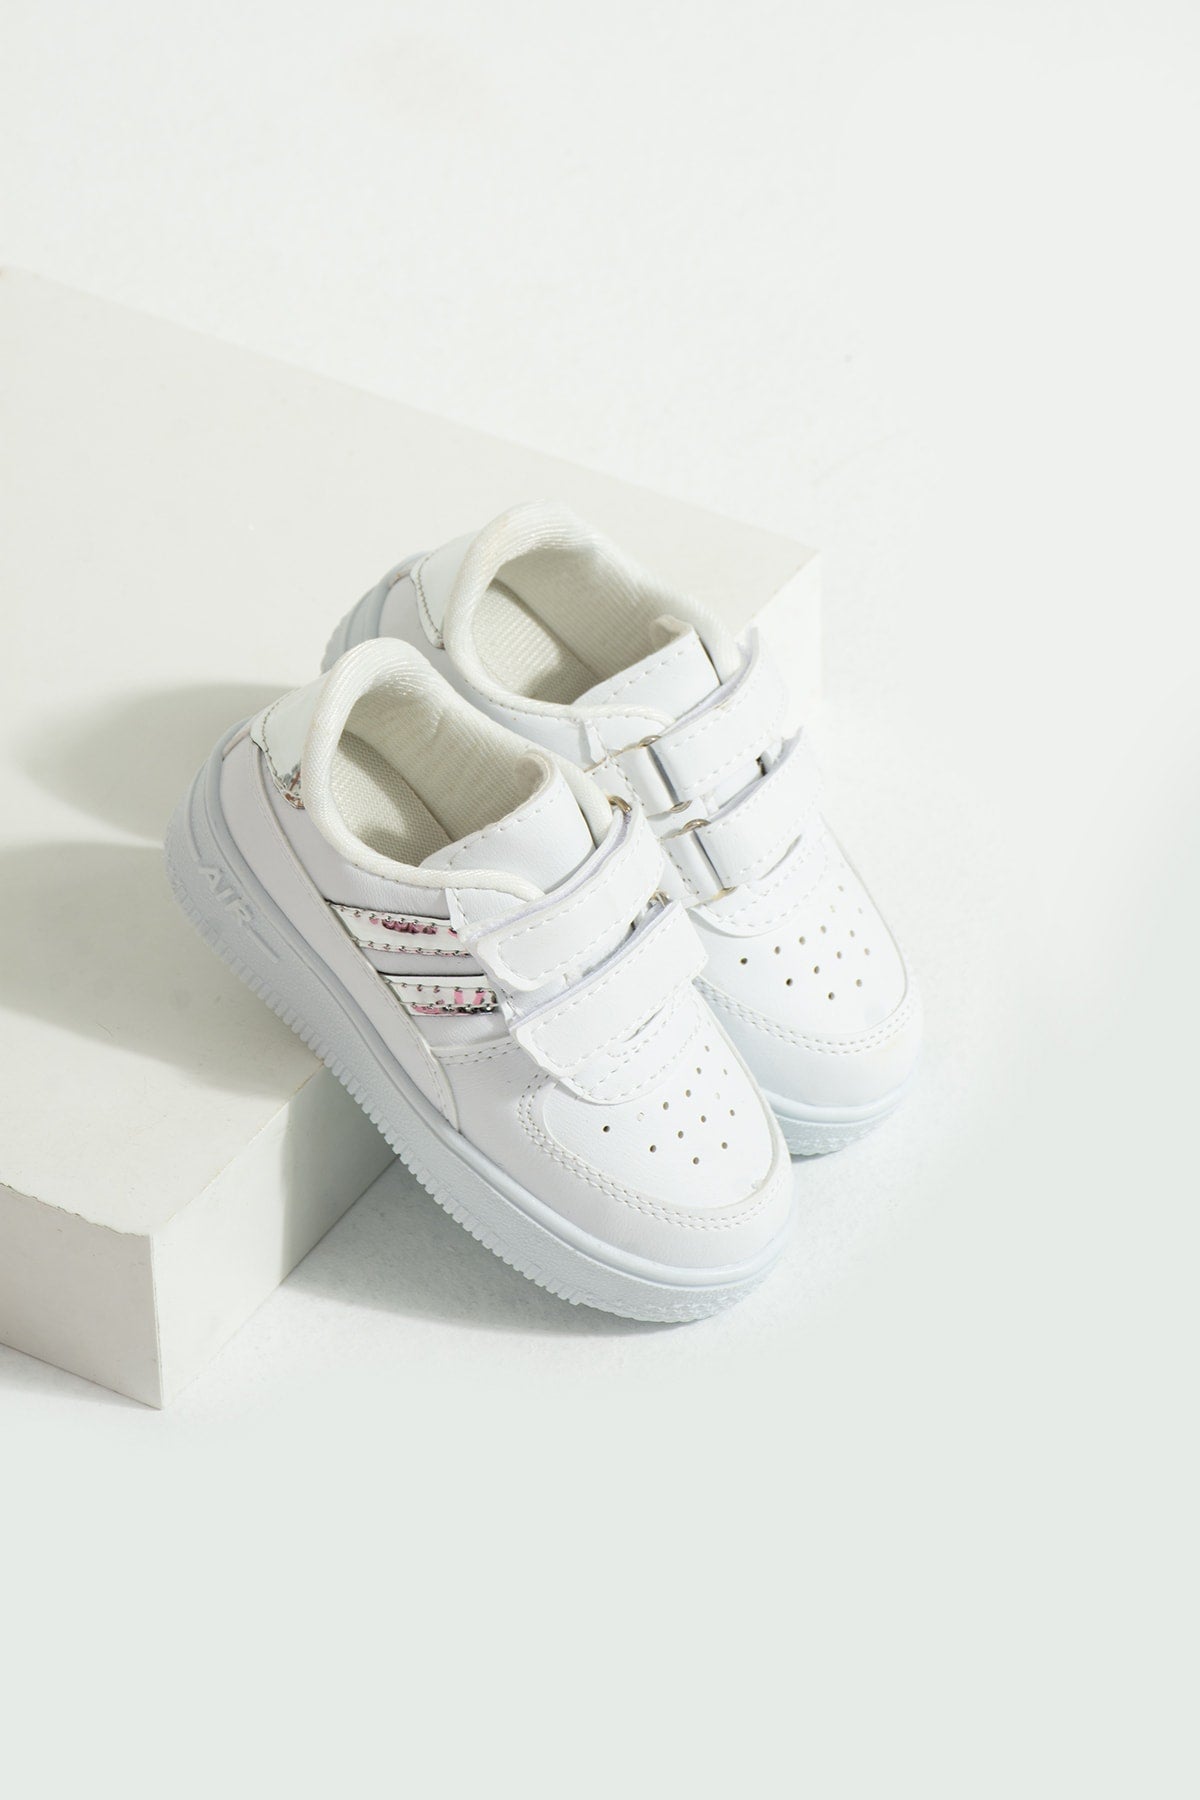 Kids White Lame Sneakers Velcro Kids Baby Shoes